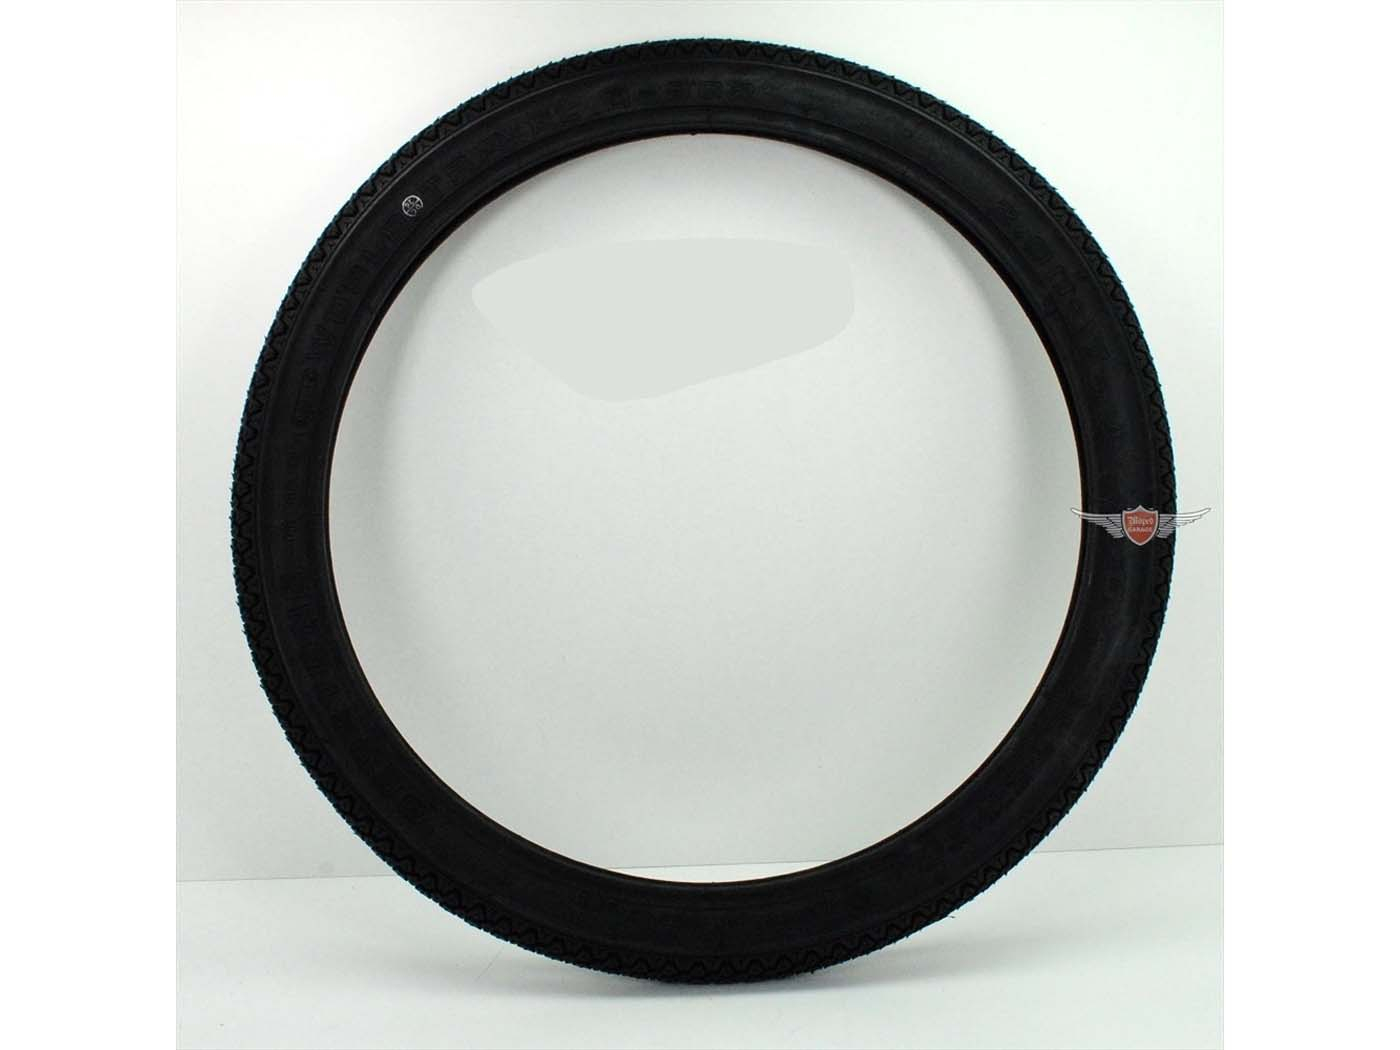 Tires Deestone 2 .00 X 17 Inch For Peugeot 103 Moped Moped